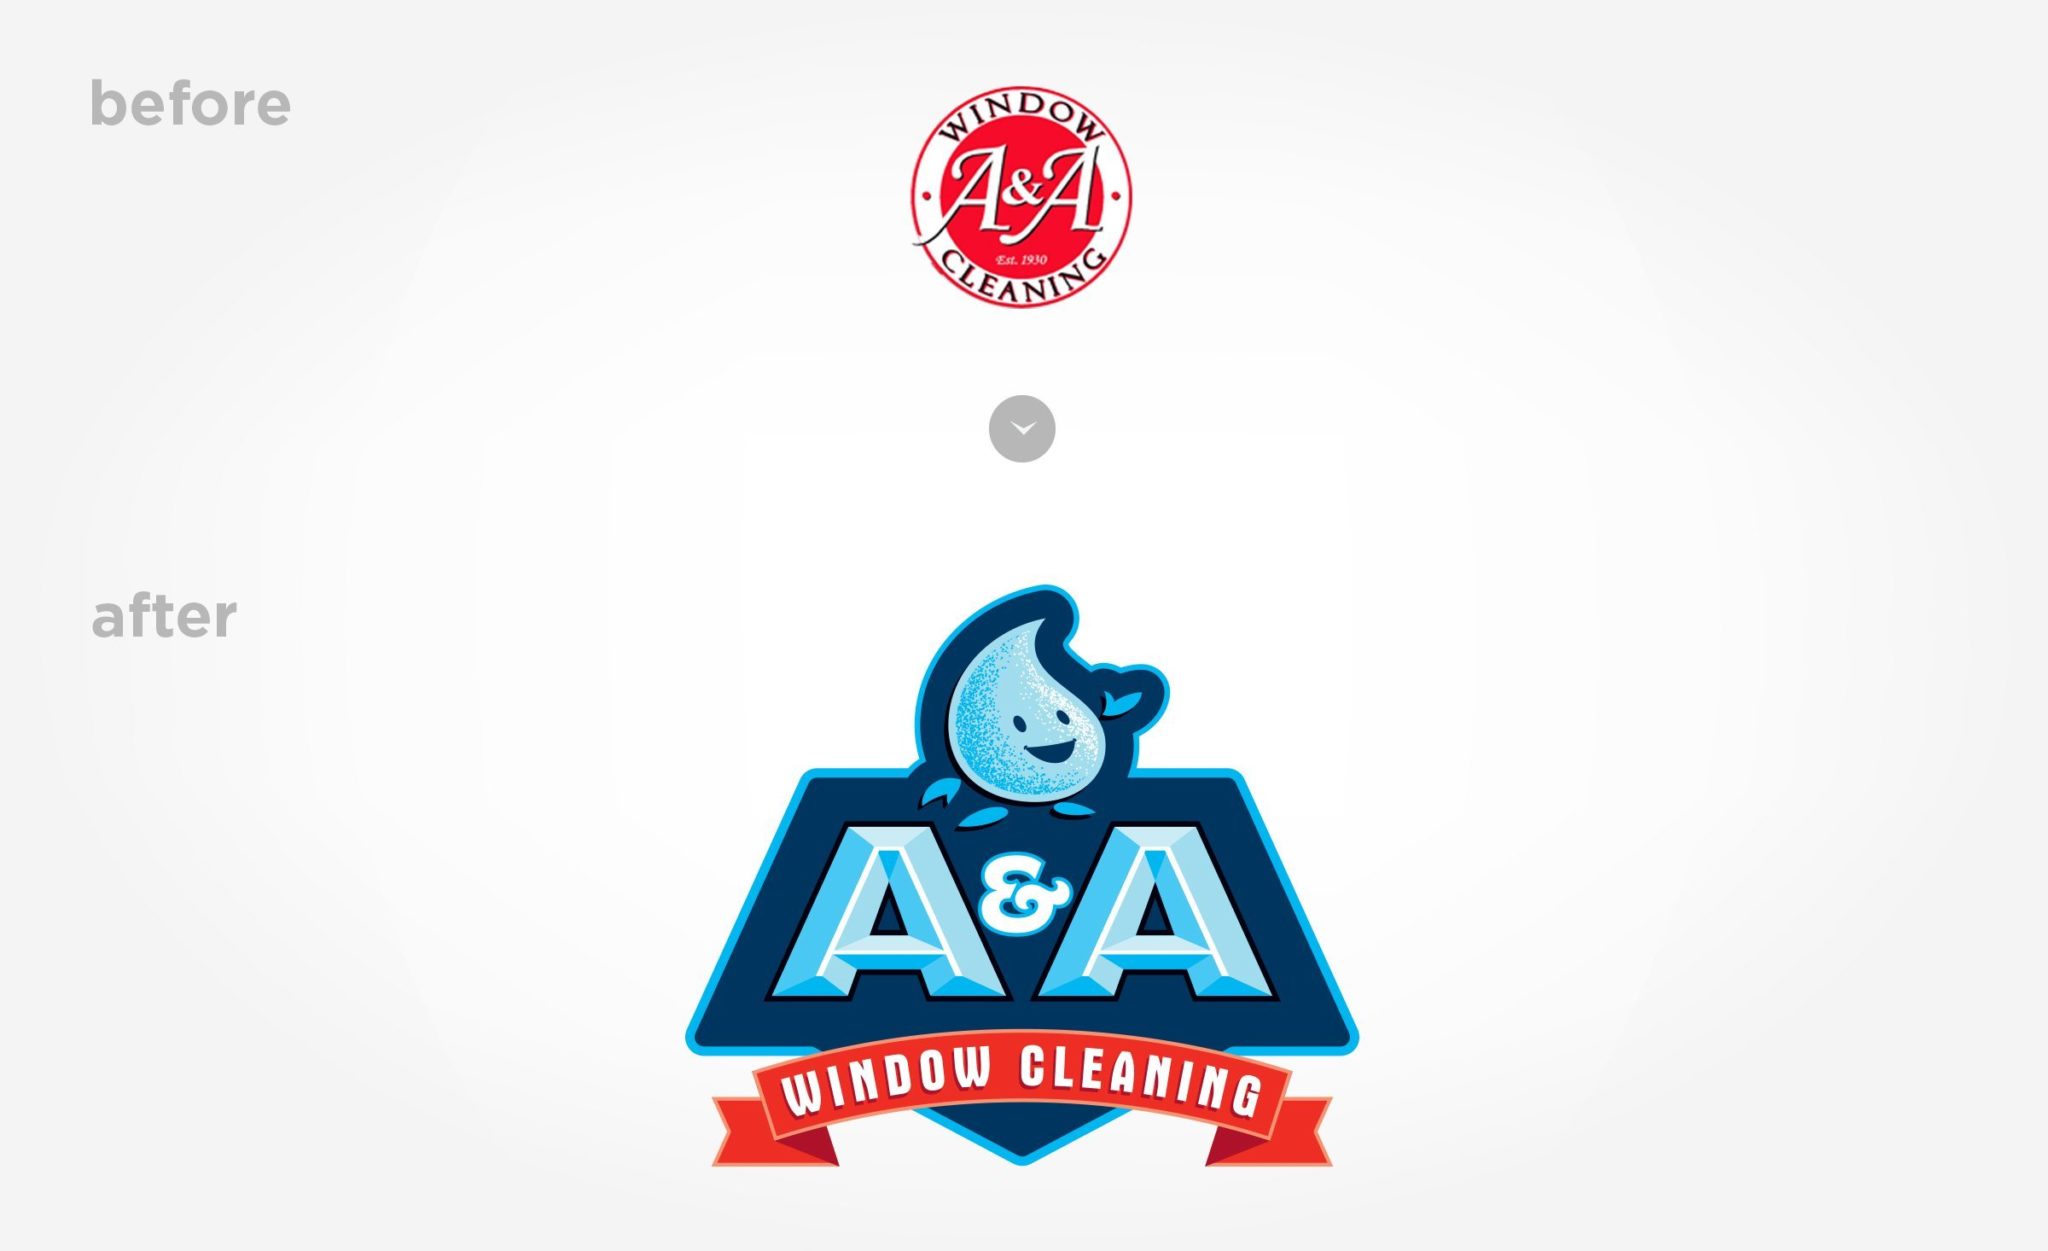 Before & after logo design for A&A Window Cleaning.